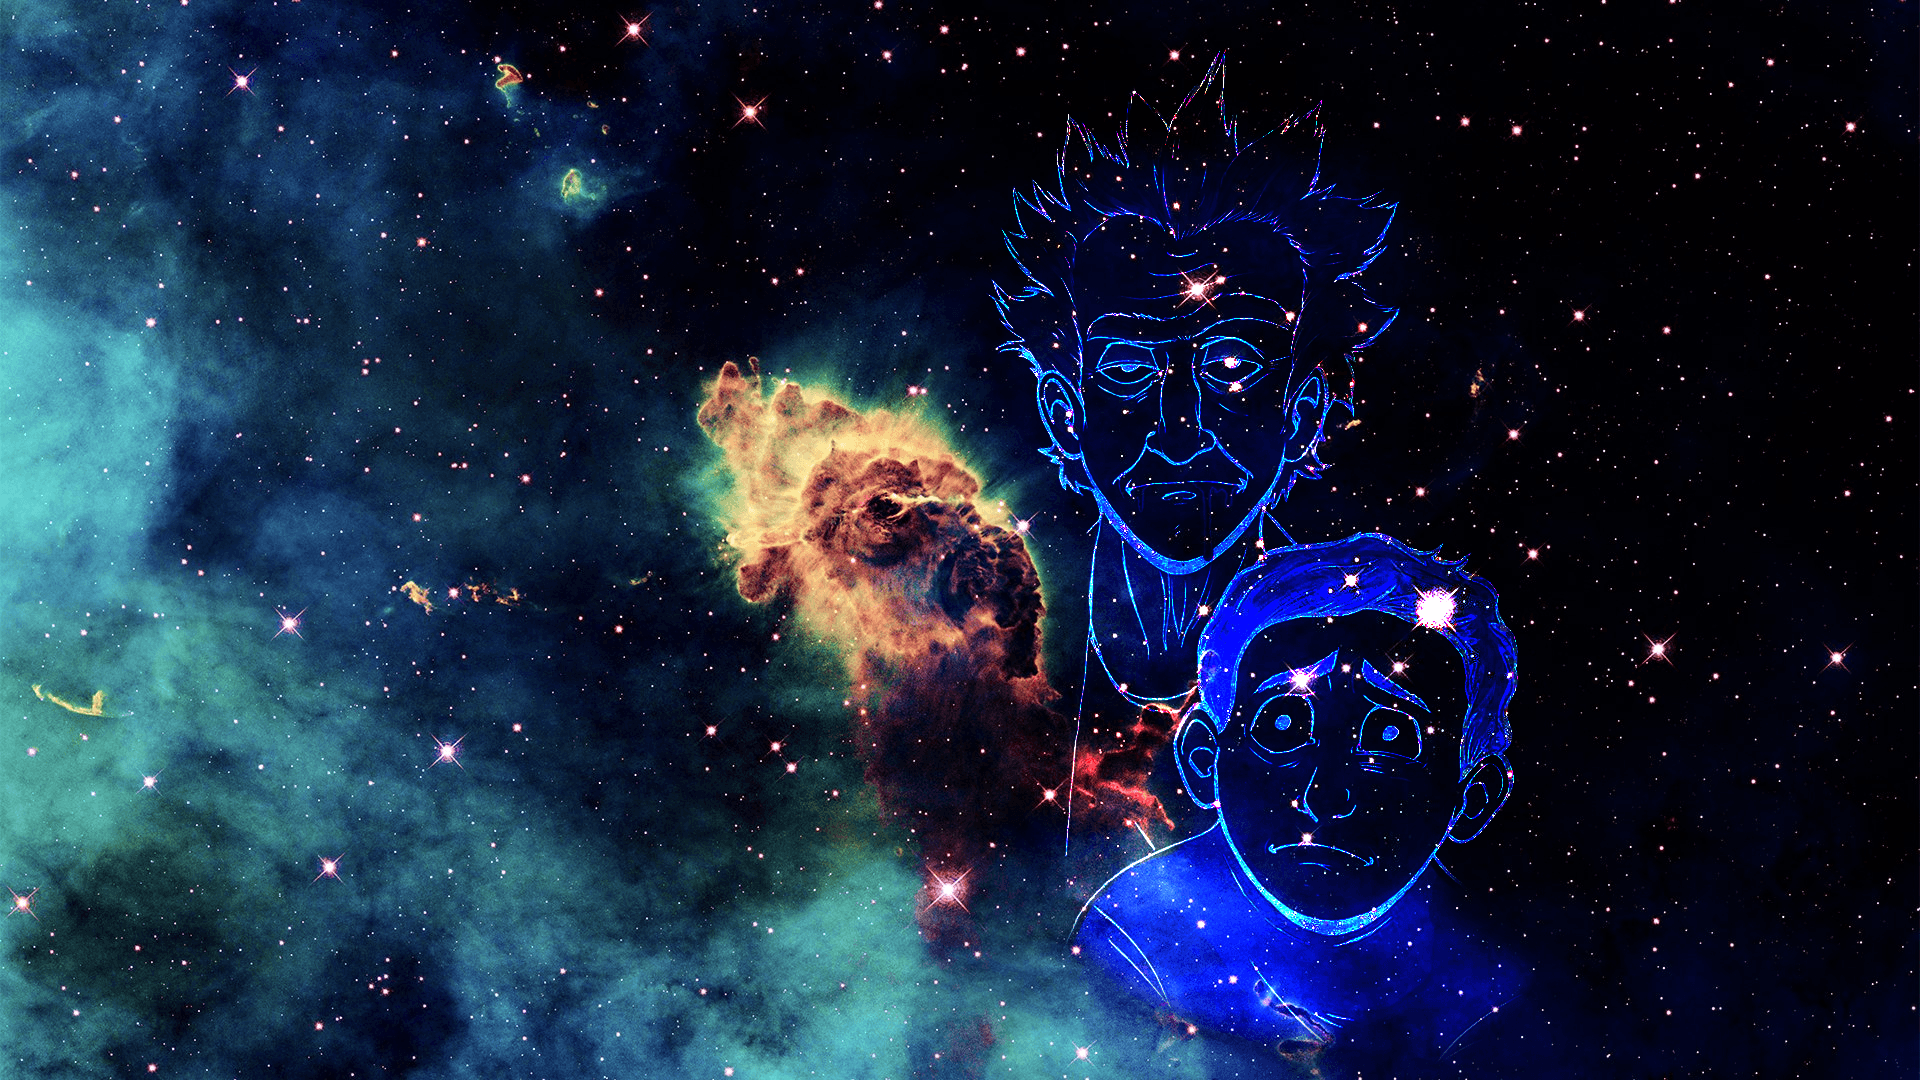 Rick and Morty Space Wallpapers - Top Free Rick and Morty Space